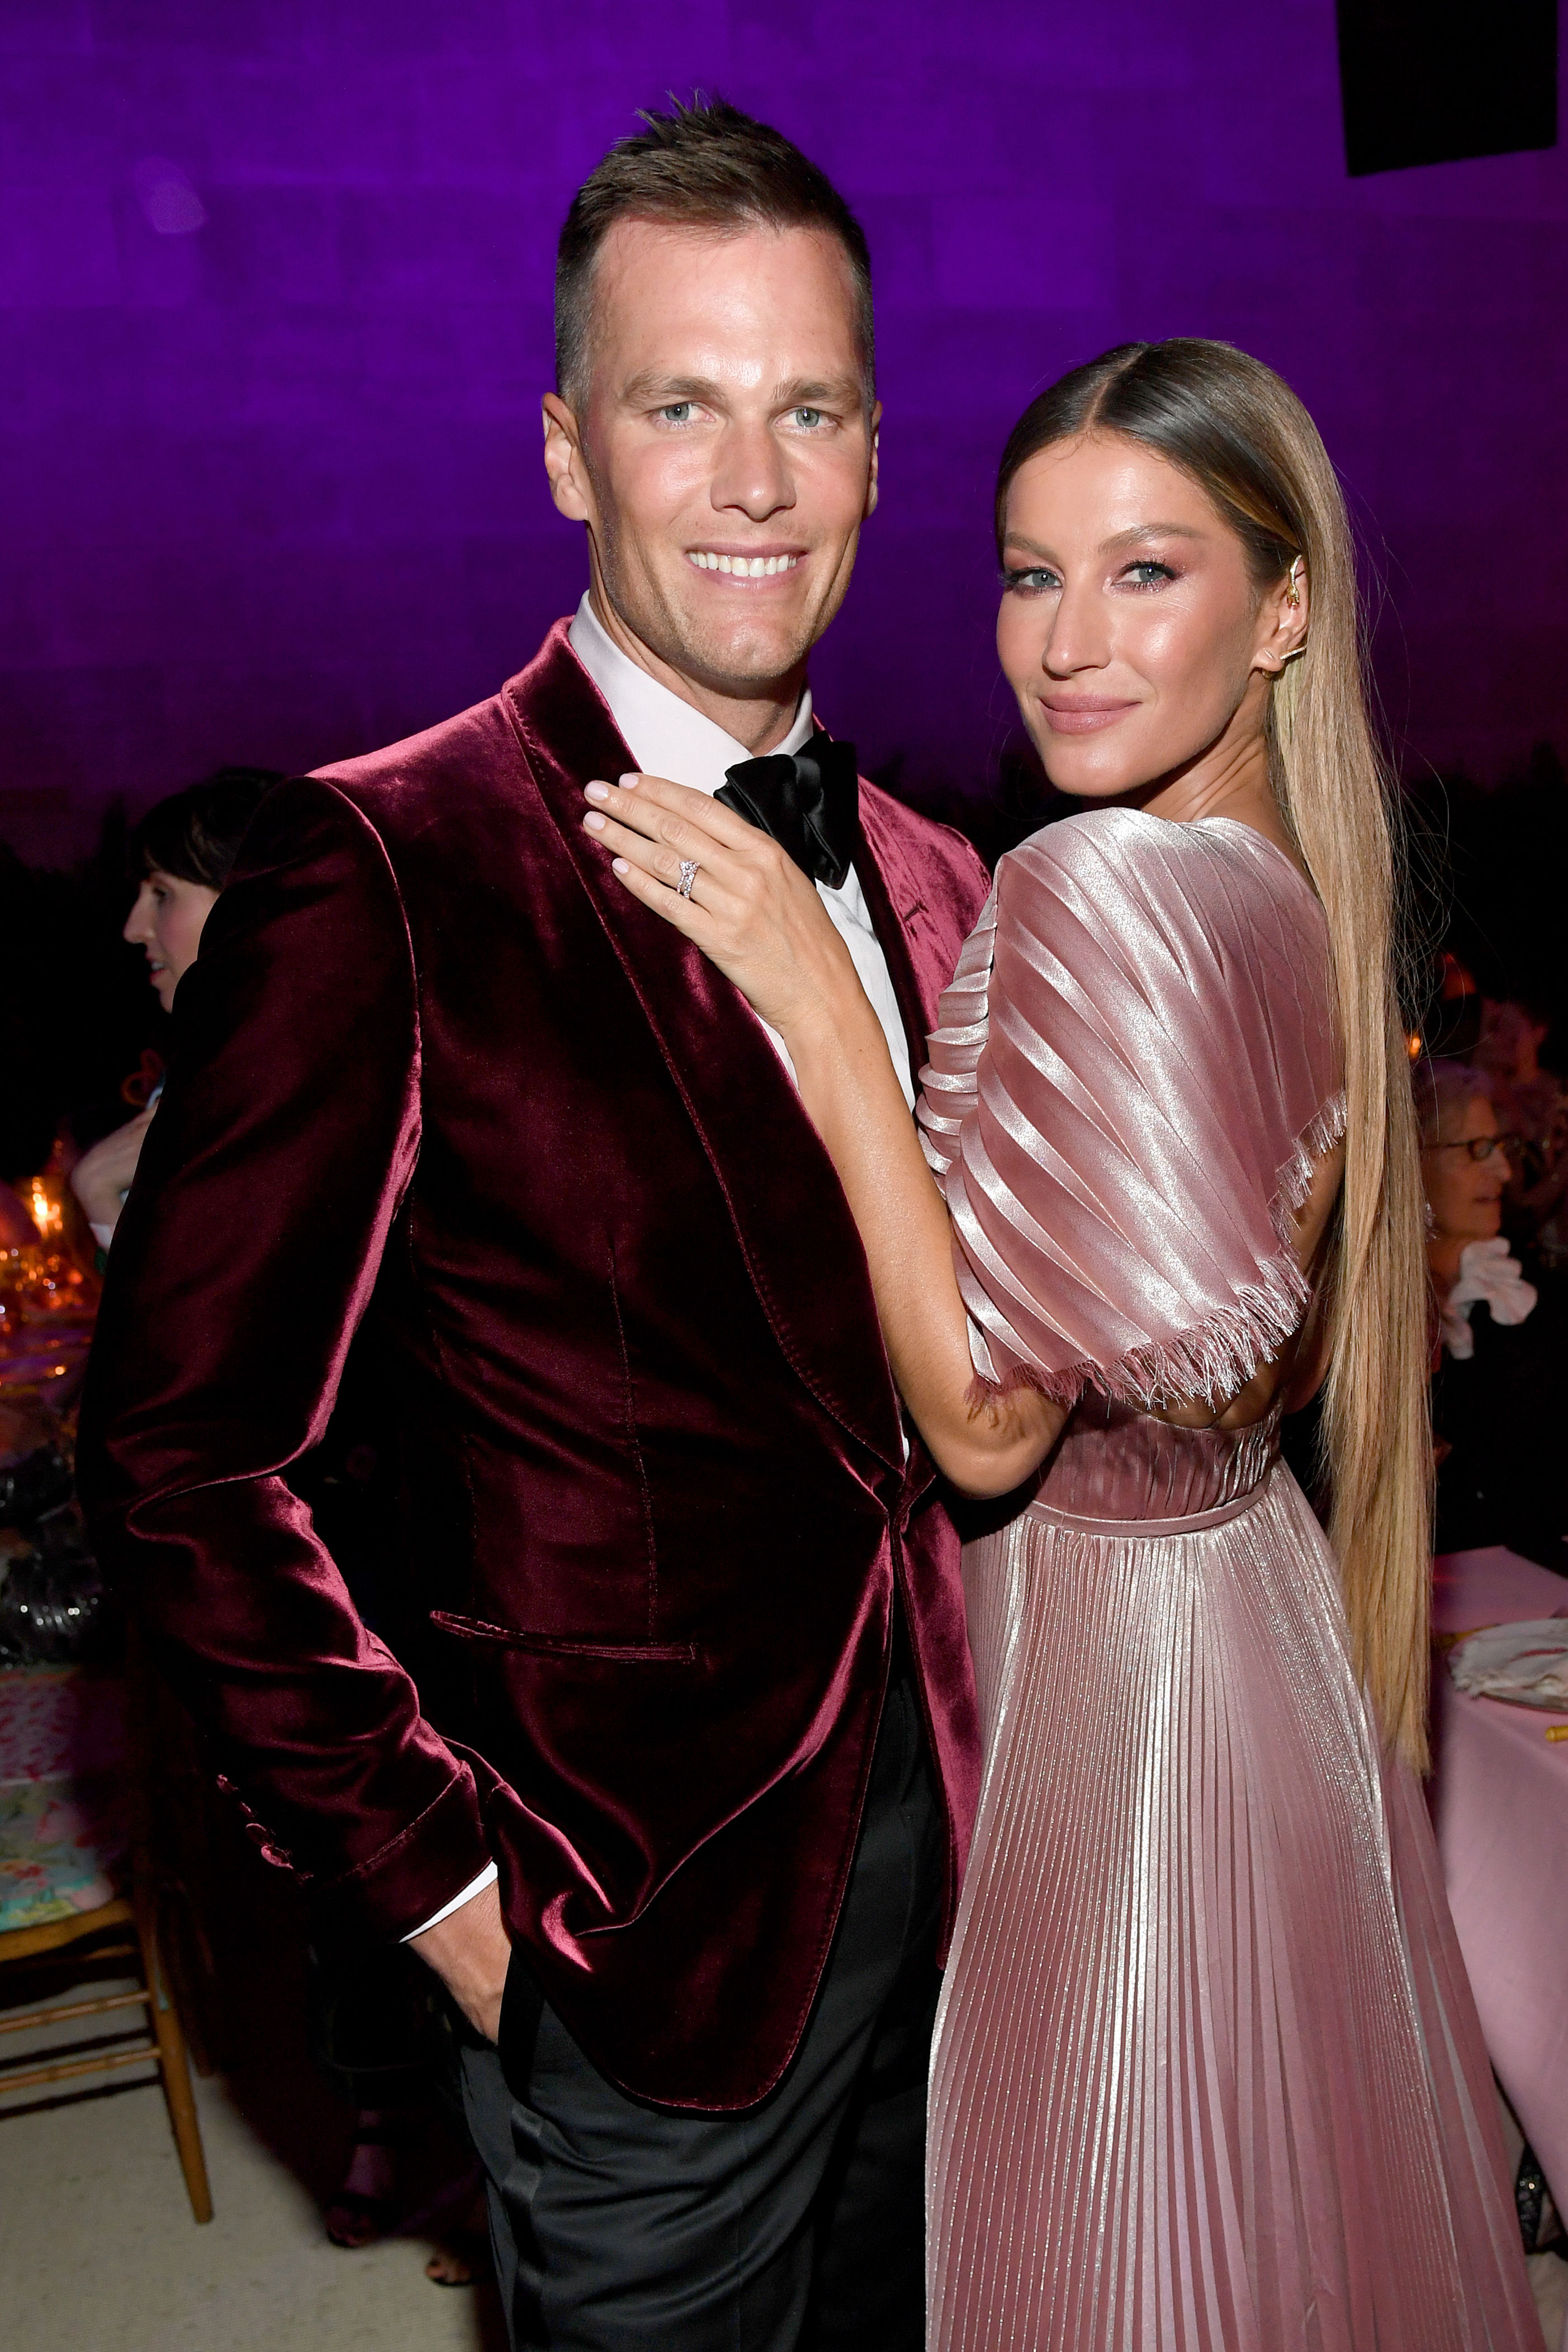 <p>Supermodel <a href="https://www.wonderwall.com/celebrity/profiles/overview/gisele-bundchen-286.article">Gisele Bundchen</a> and NFL quarterback Tom Brady met after being set up by a mutual friend in 2006. Tom had just ended a long romance with Bridget Moynahan -- who was newly pregnant with their son Jack at the time -- and Gisele had split from <a href="https://www.wonderwall.com/celebrity/profiles/overview/leonardo-dicaprio-343.article">Leonardo DiCaprio</a> a year earlier. "This friend told me he knew a girl version of me," Tom told Details in 2009. Gisele added, "And he said to me he'd found a boy version of me." In a September 2021 interview with <a href="https://www.wsj.com/articles/tom-brady-speaks-his-mind-11632826511">WSJ Magazine</a>, Tom further revealed that <a href="https://www.wonderwall.com/celebrity/couples/emma-watson-dating-son-of-controversial-british-billionaire-more-celeb-love-news-late-september-2021-romance-report-504055.gallery?photoId=378230">the supermodel sent him to voicemail</a> the first time he called her about getting together. "I think the one phone call that changed my life was my friend Ed, who called me one day and he said, 'I have this girl and I think you should call her,'" recalled the football star. "I ended up calling her and it ended up being the love of my life. … She didn't pick up, actually. I had to leave a voicemail." In 2015, Gisele told British Vogue that it was love at first sight when she finally met Tom. "I knew Tom was the one straightaway," she said. "I could see it in his eyes that he was a man with integrity who believes in the same things I do." They've been married since 2009.</p>